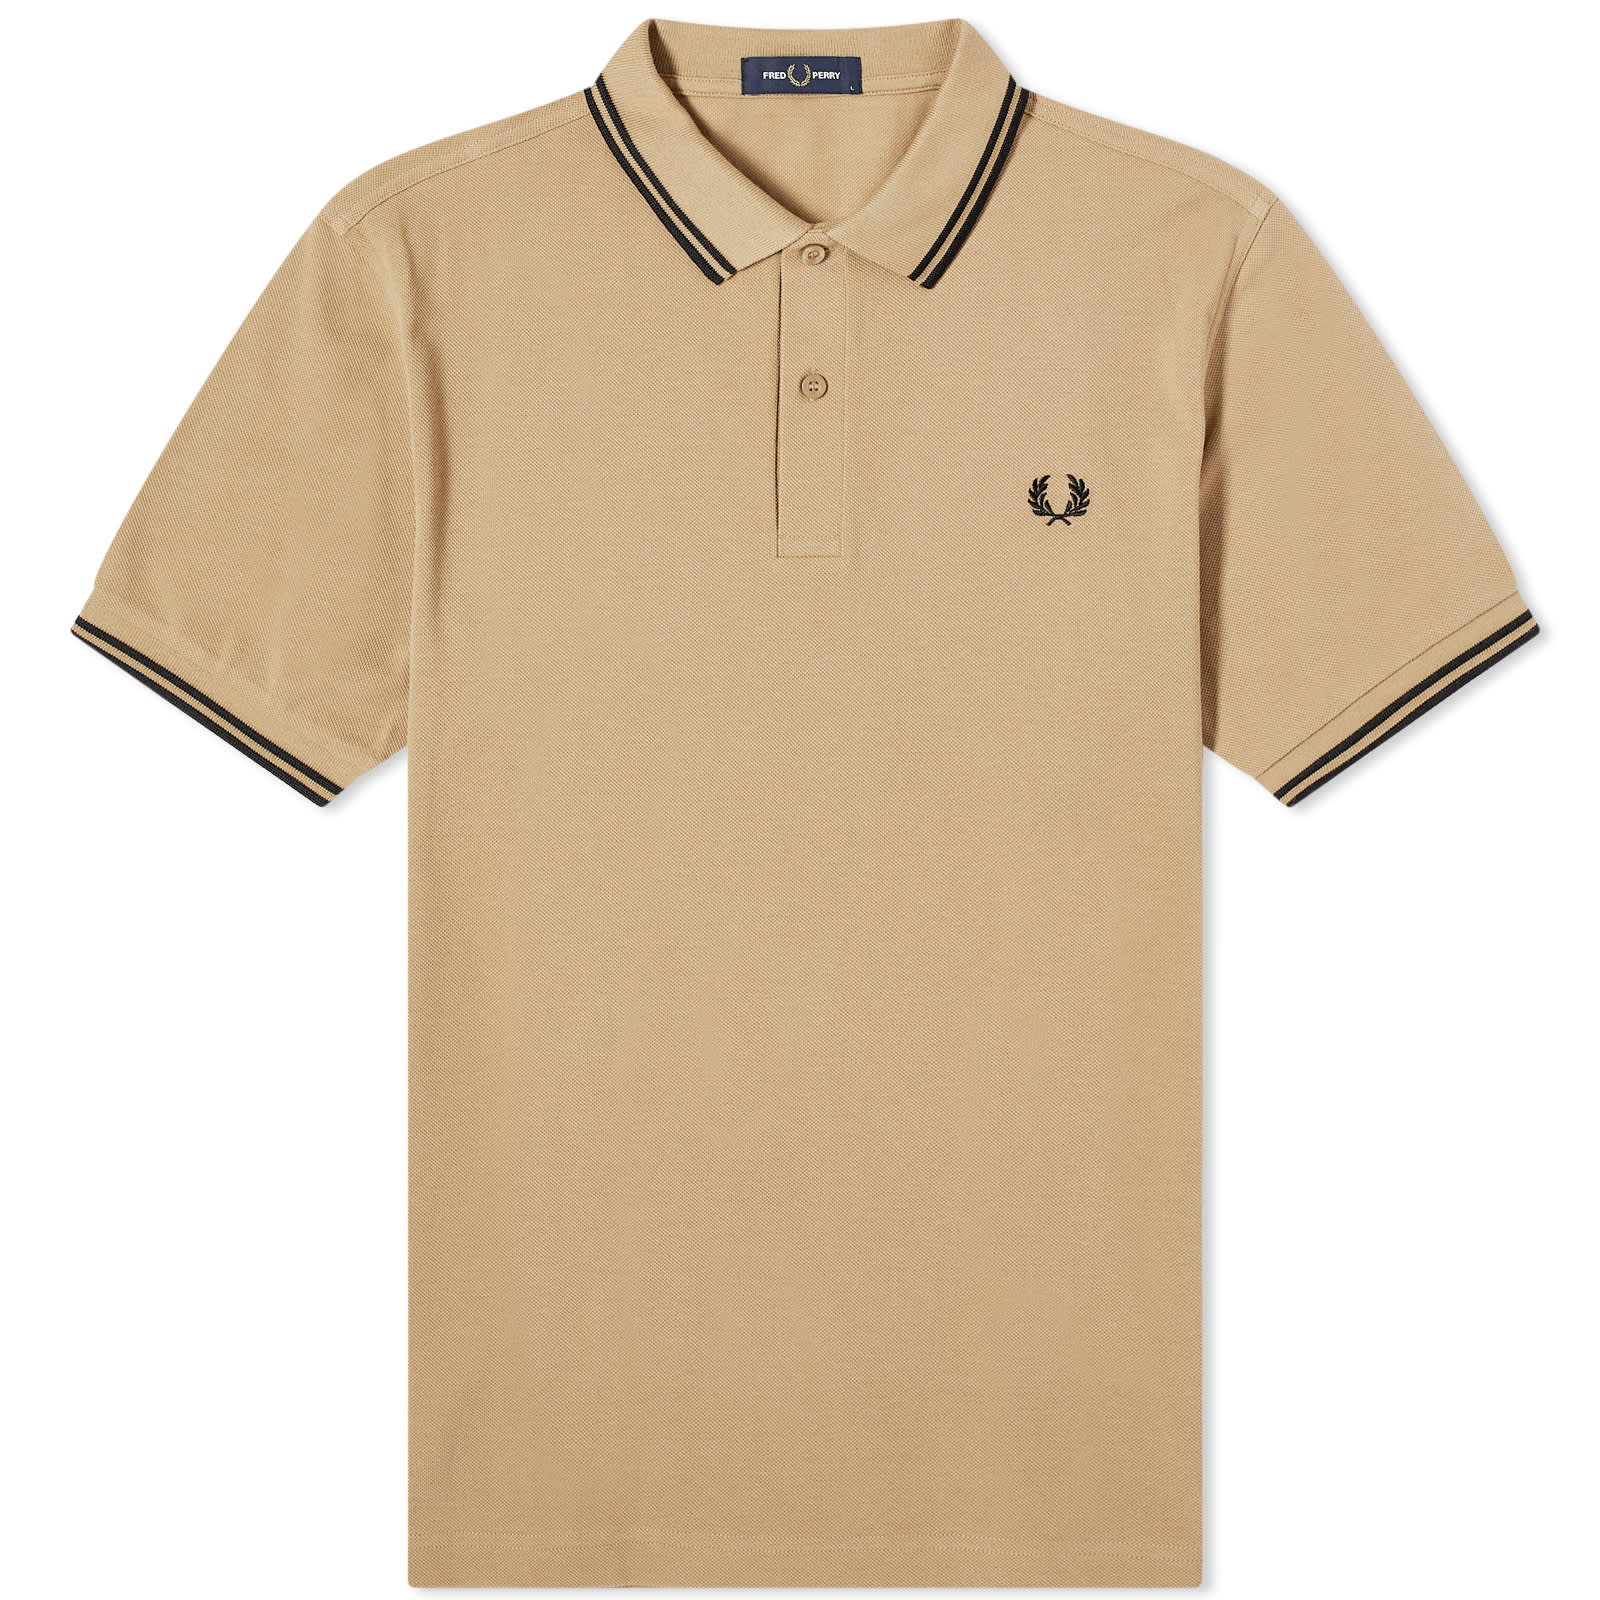 Поло Fred Perry Twin Tipped, цвет Warm Stone & Black футболка fred perry twin tipped черный